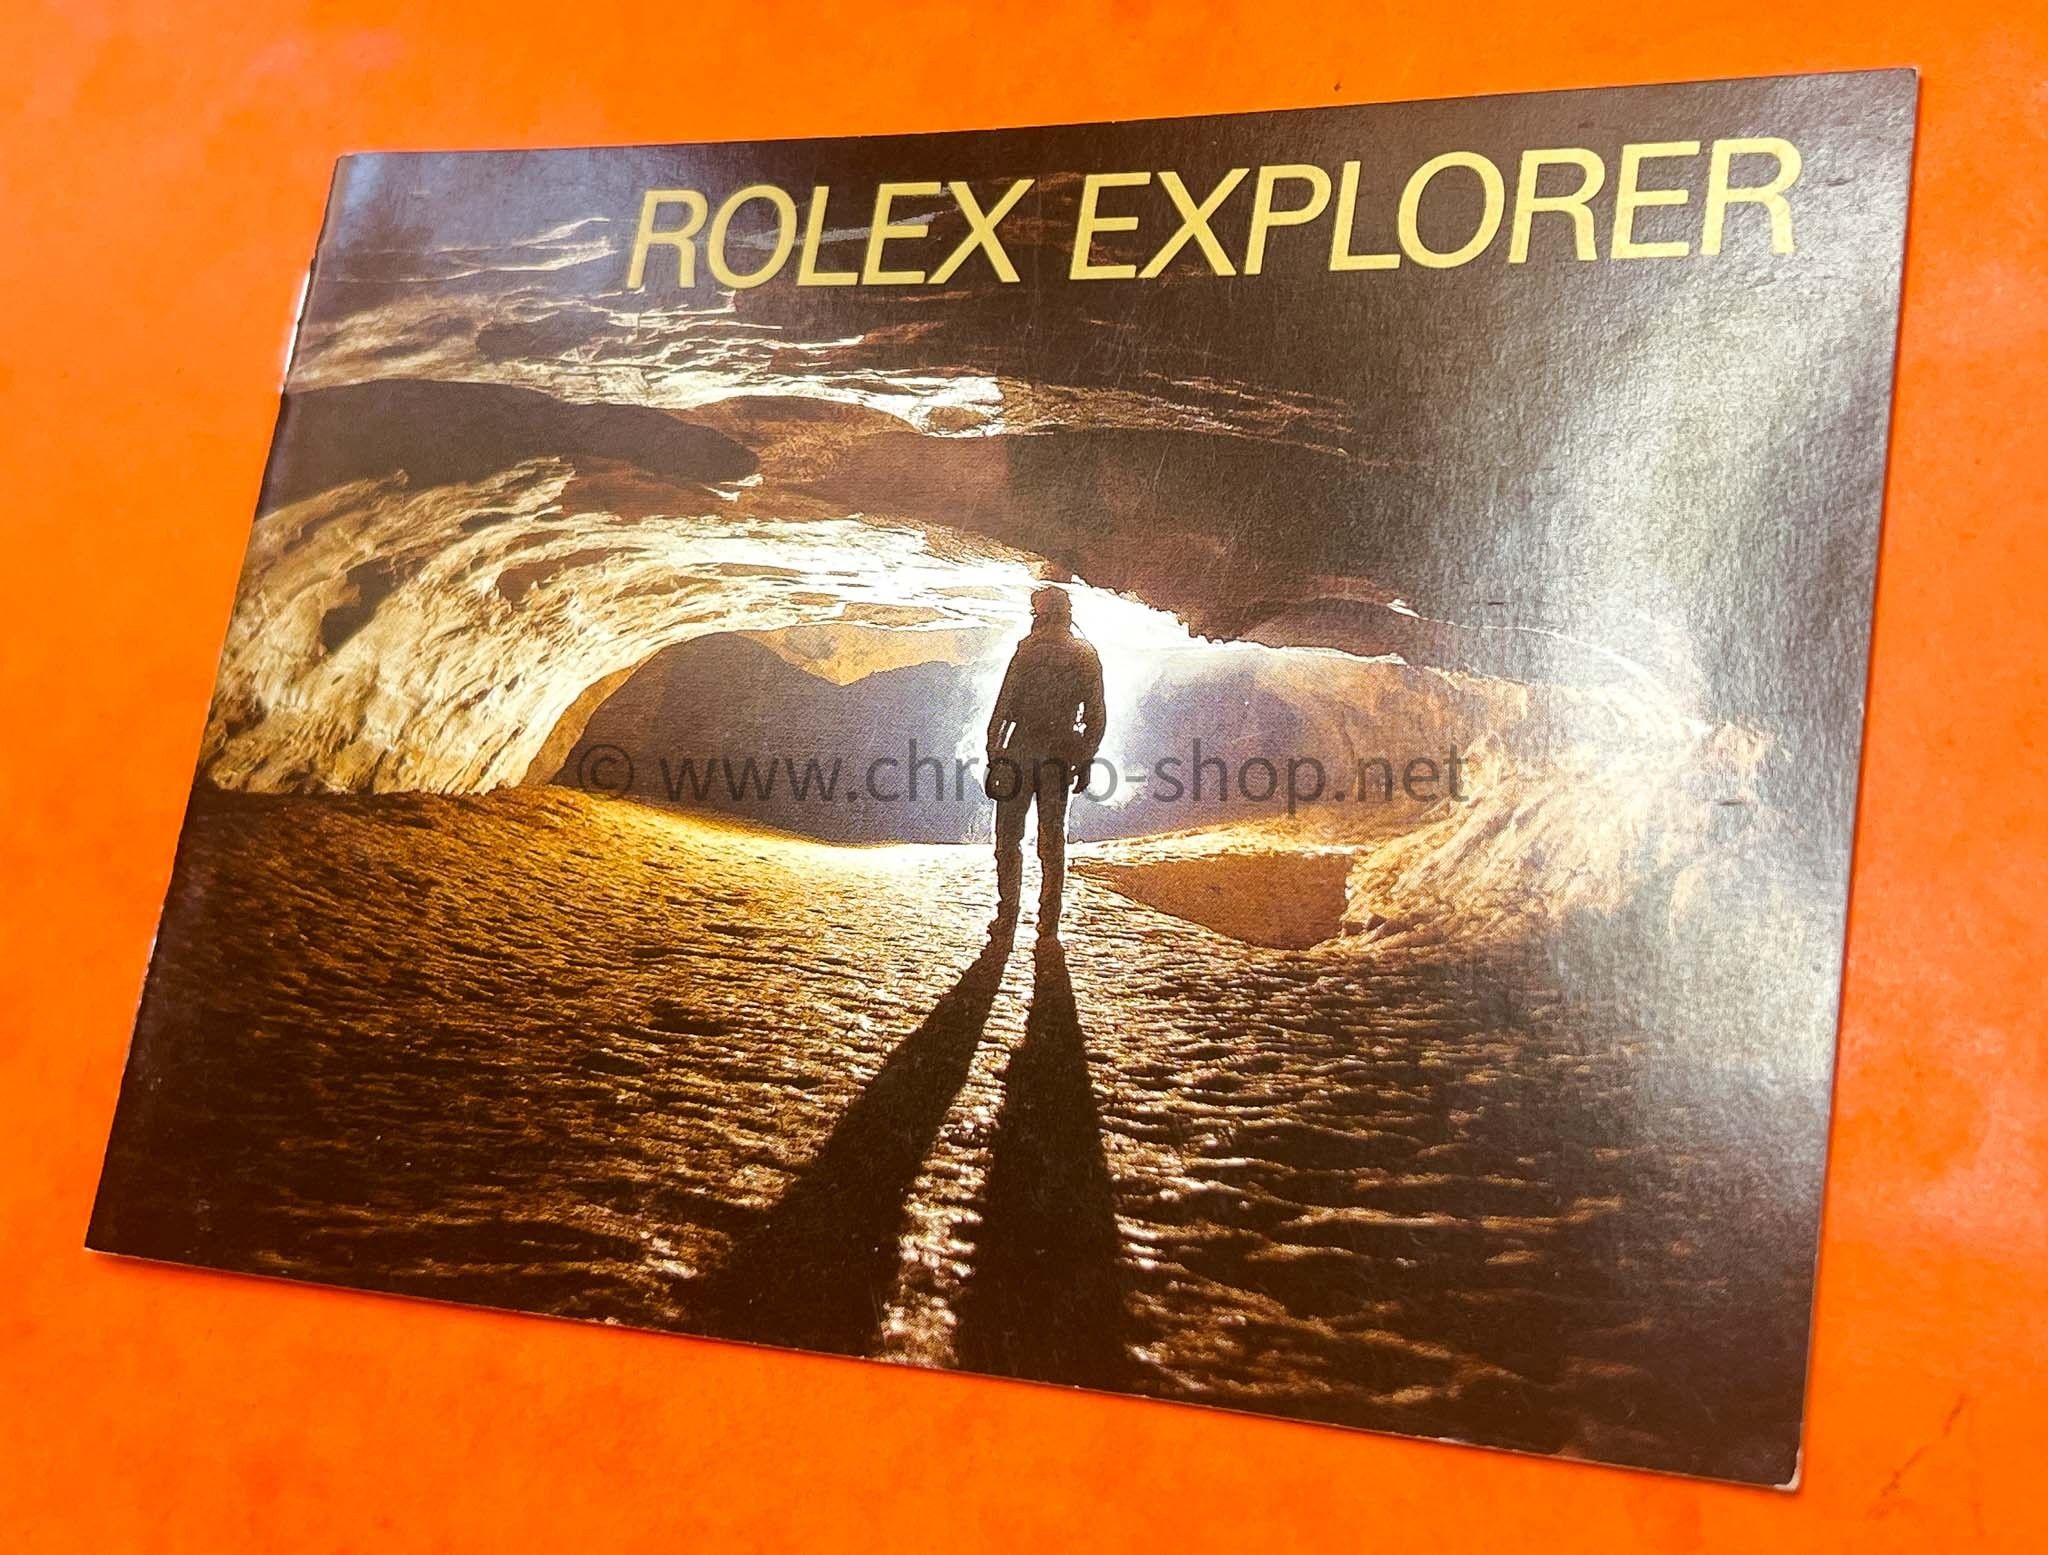 Rolex Vintage Genuine 2002 Rolex Explorer I & II Watches Owners Manual Colorful Booklet Manual German Instructions 114270,16570